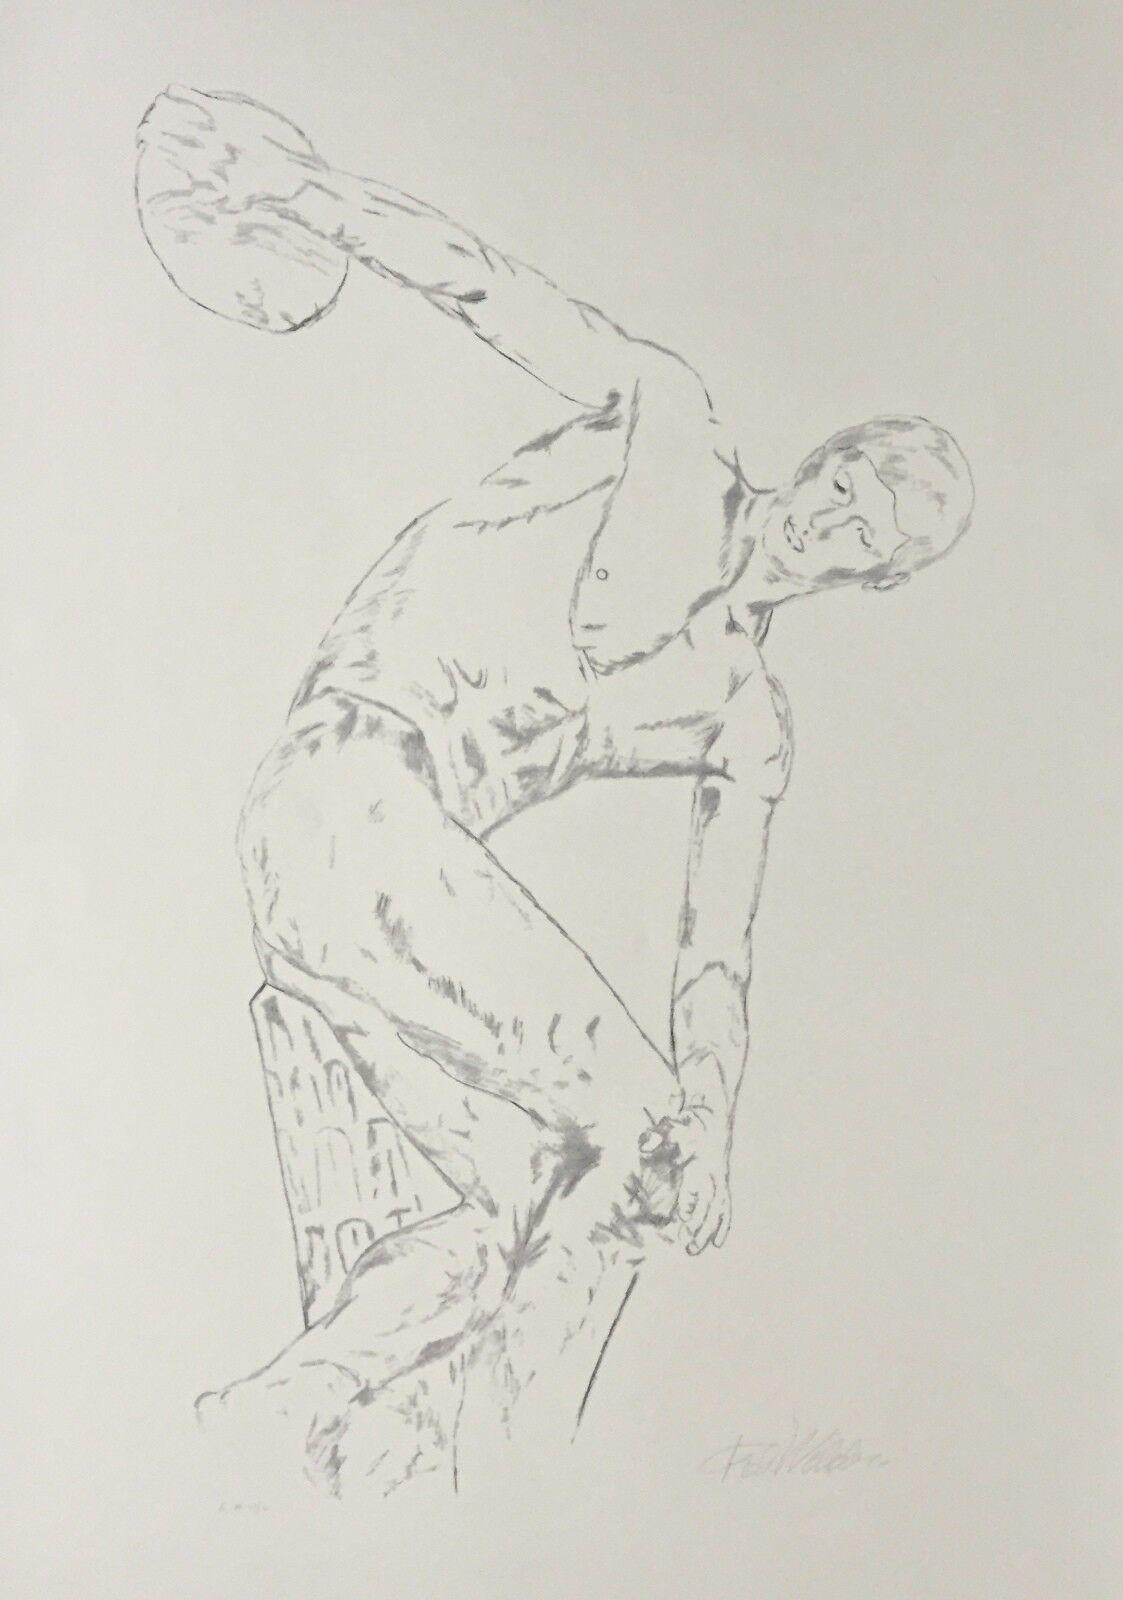 Artist: Felix de Weldon (1907-2003)
Title: Discus Thrower
Year: 2001
Edition: 150, plus proofs
Medium: Lithograph with graphite ink on BFK Rives cream color paper
Inscription: Signed & numbered in pencil
Size: 30 x 44 inches
Condition: